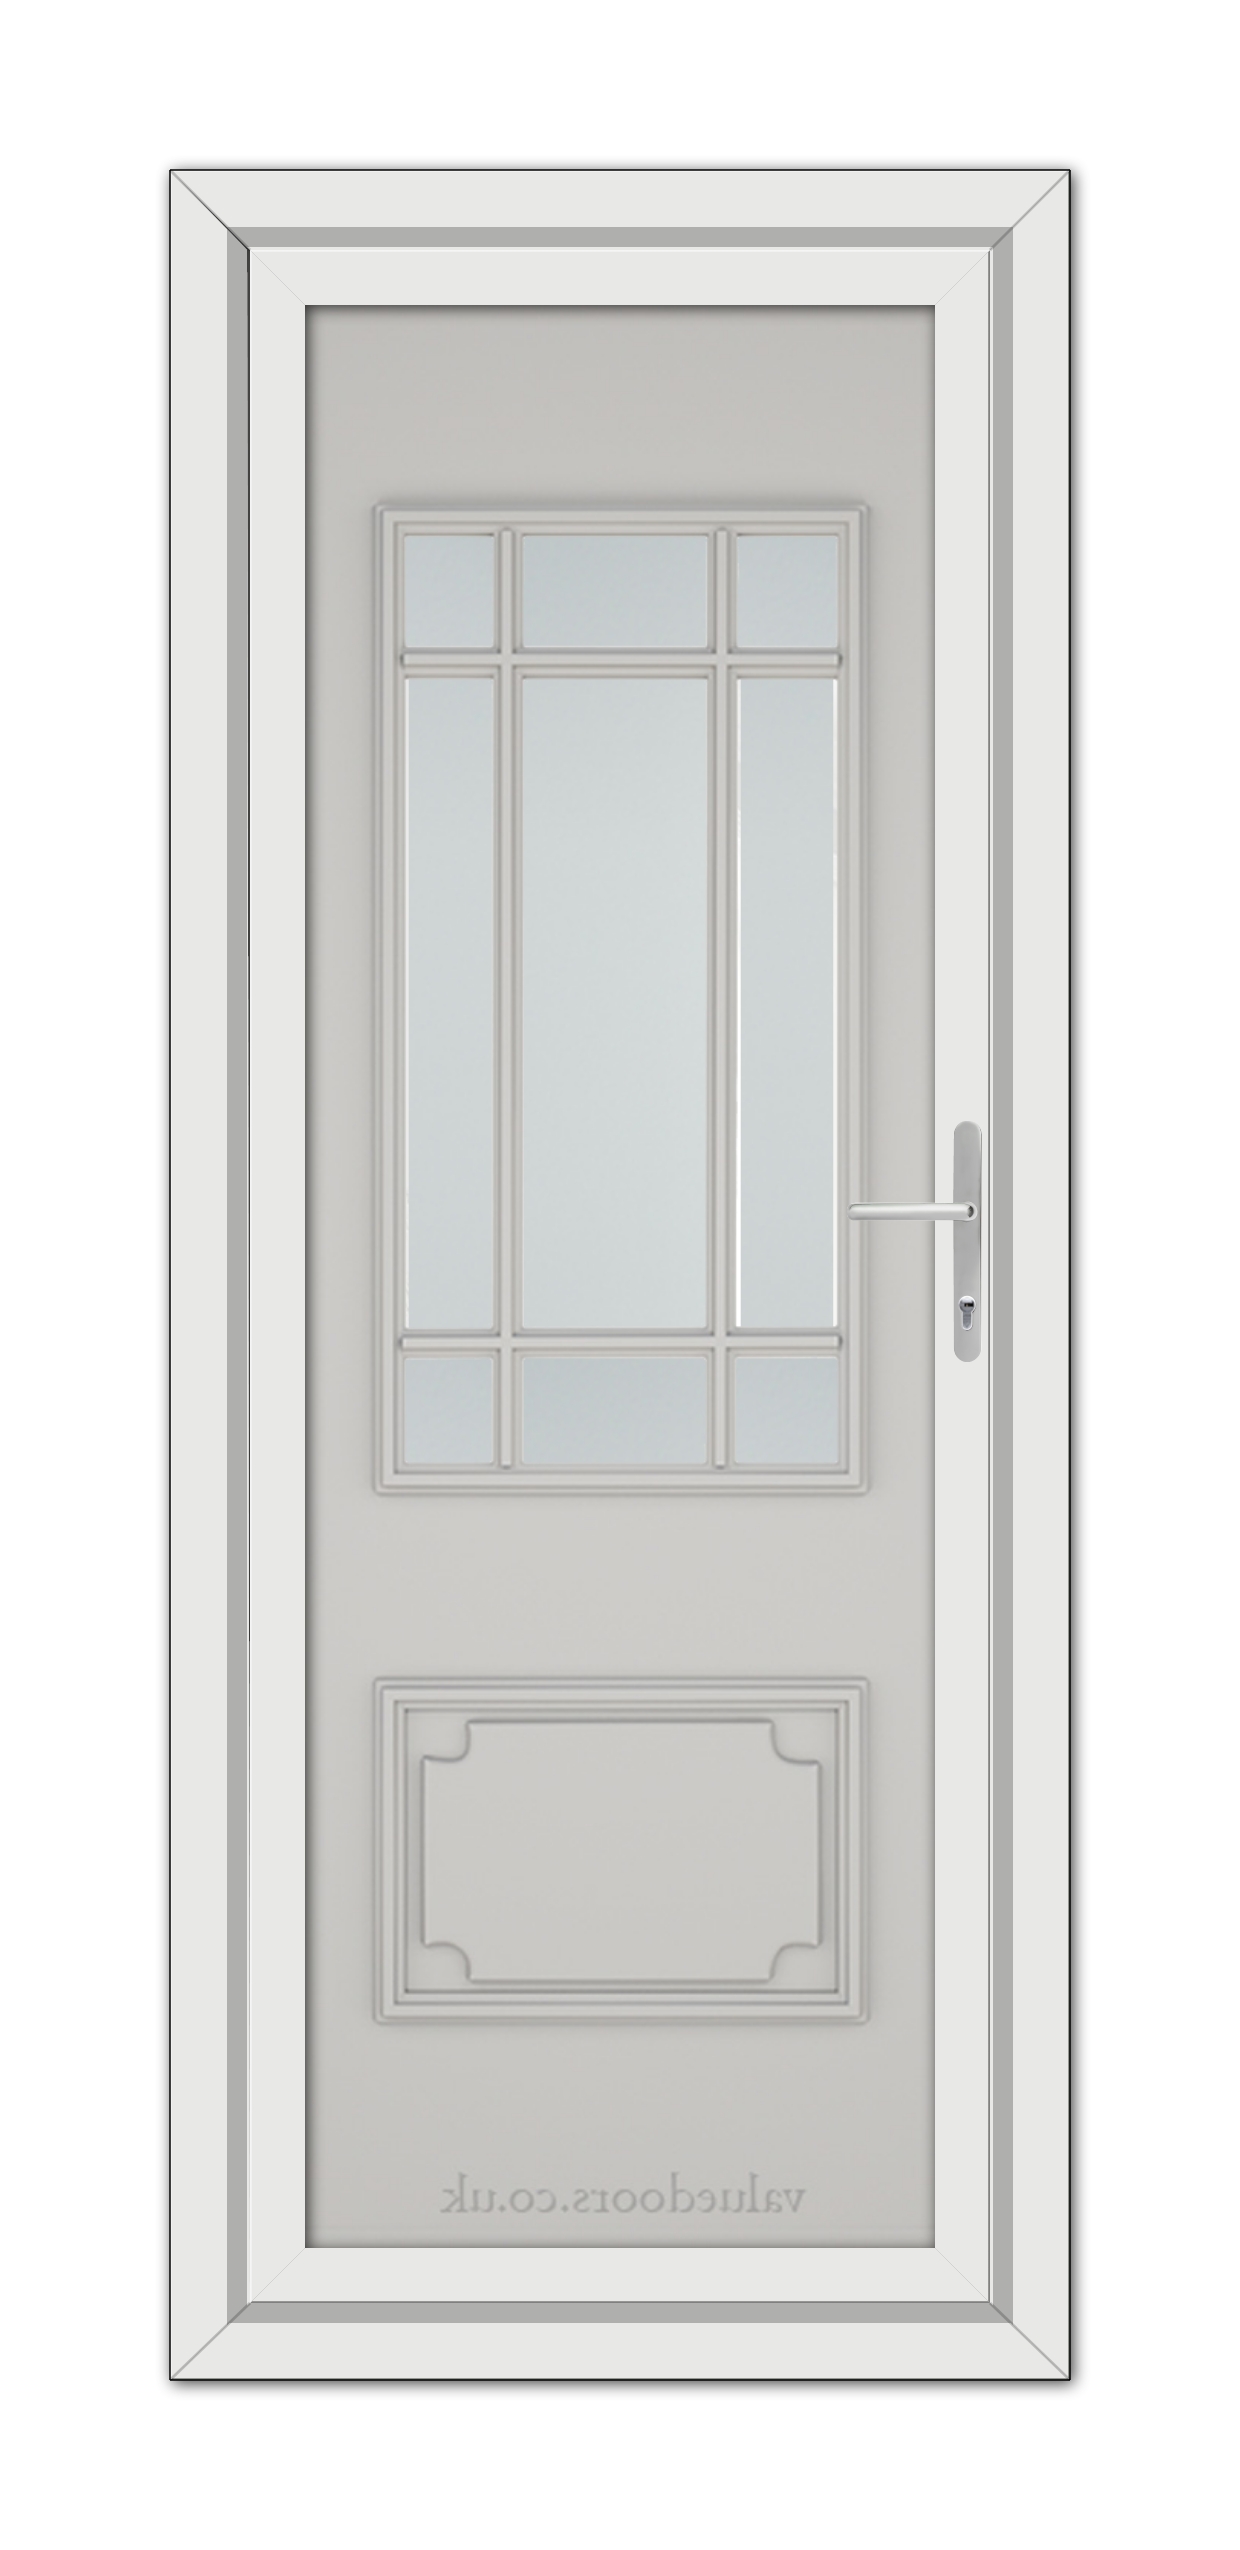 A vertical image of a closed, Silver Grey Seville uPVC Door featuring a rectangular window with white grid design and a metallic handle on the right side.